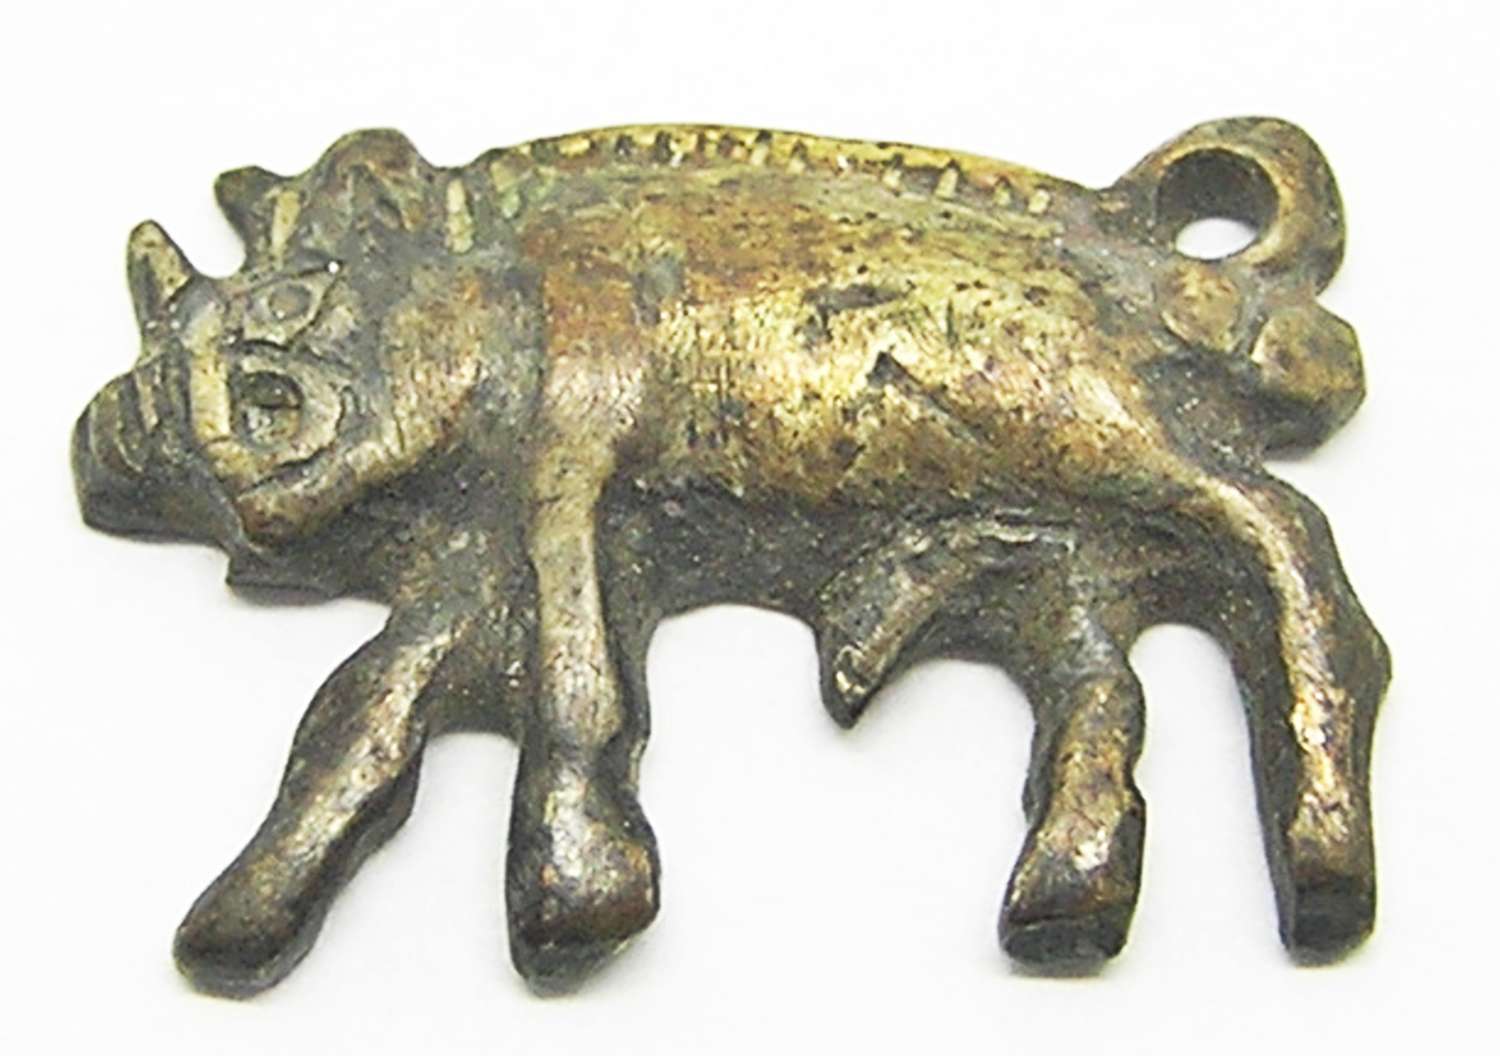 Medieval silver-gilt livery badge of the Boar of King Richard III